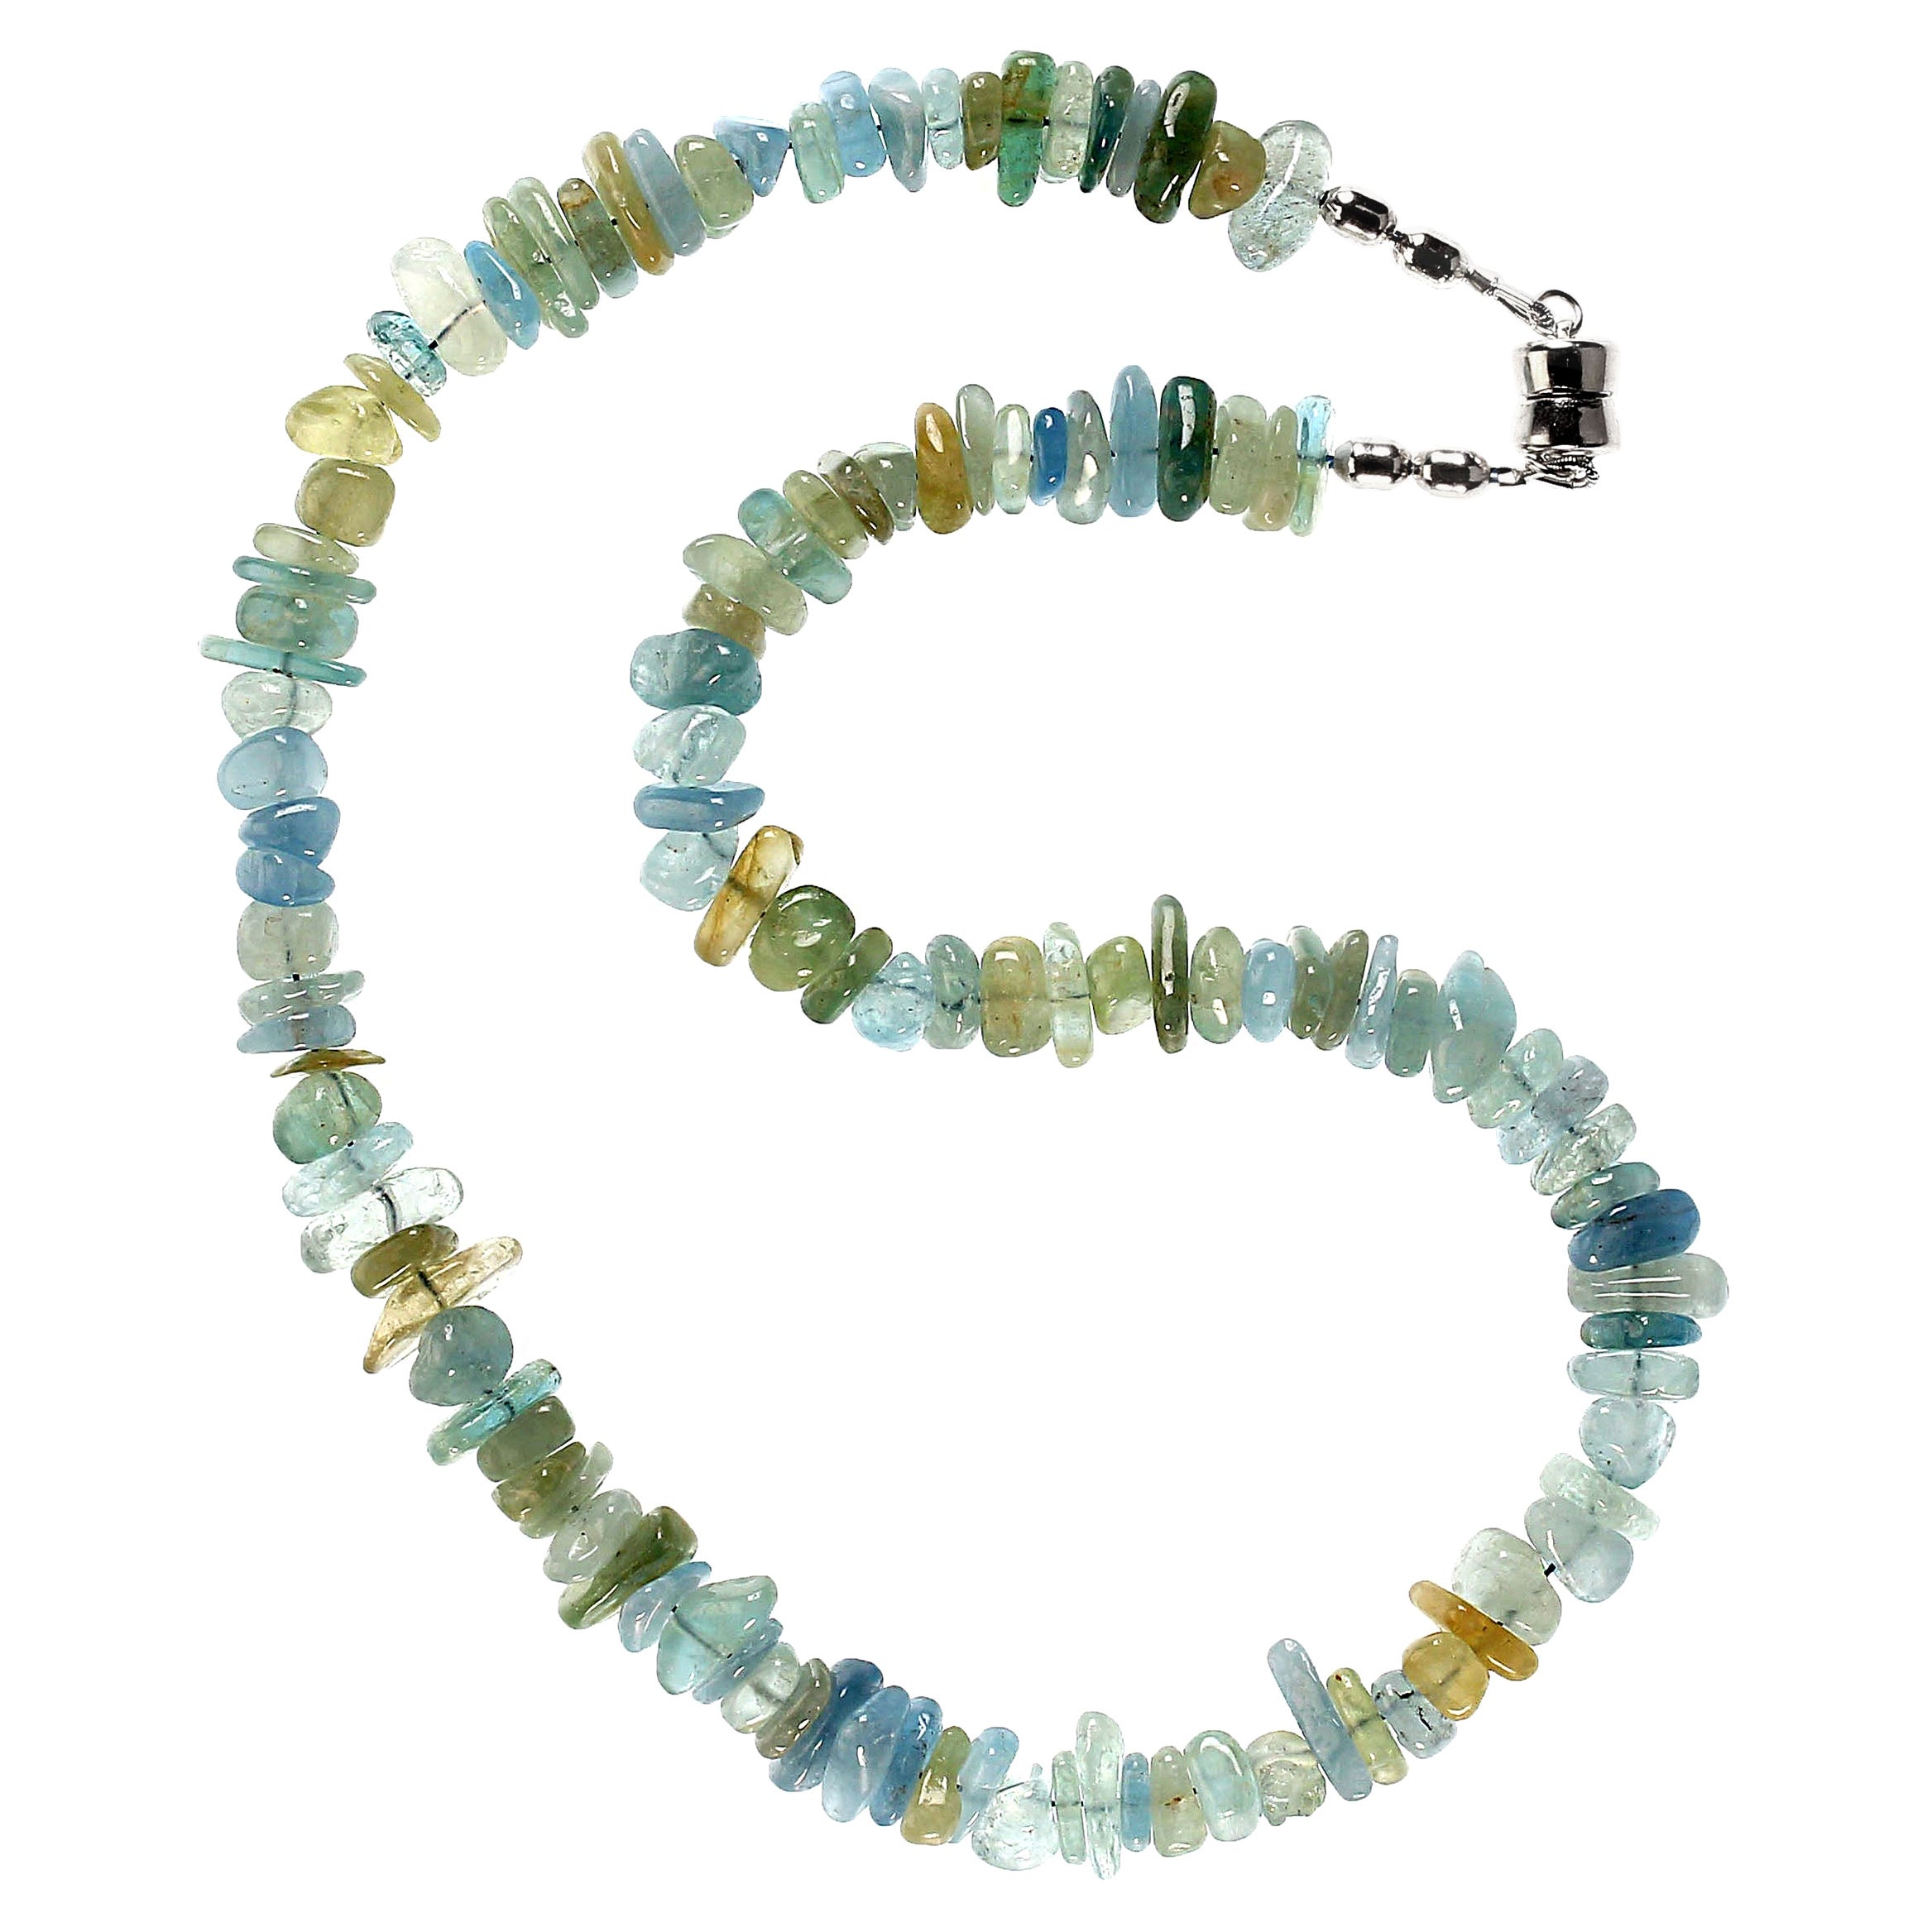 AJD 18 Inch Highly Polished Blue/Green Aquamarine Chip Necklace March Birthstone